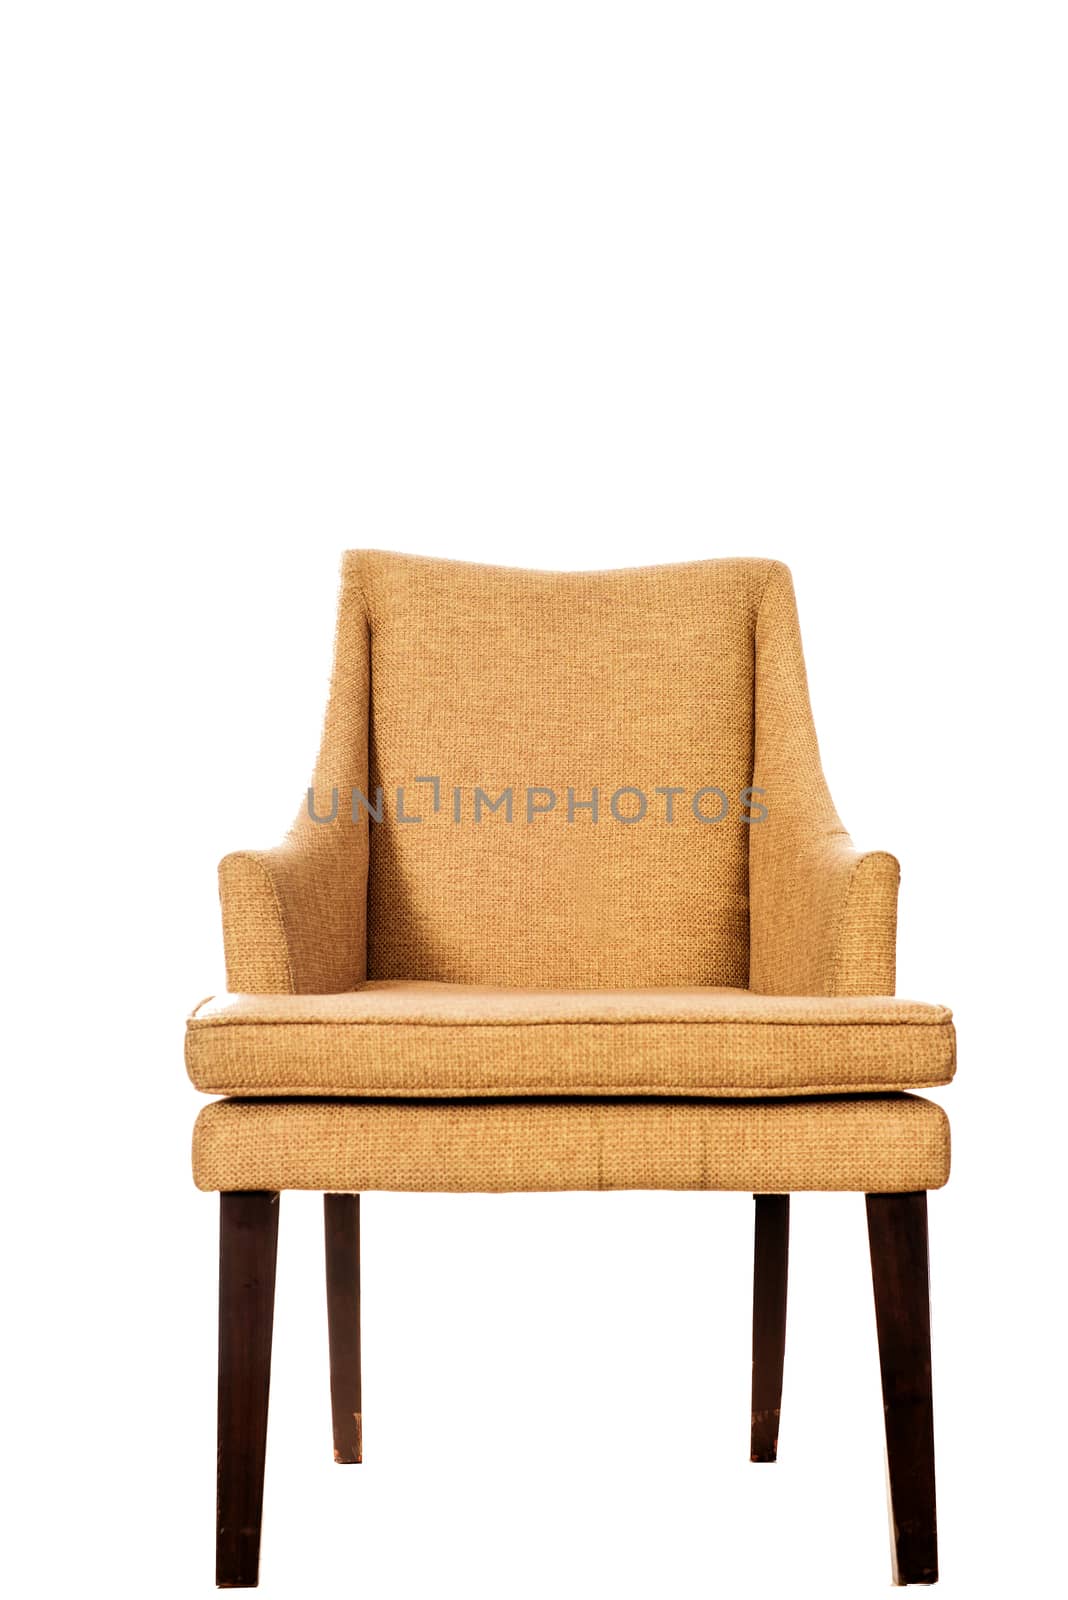 Wooden brown Chair Isolated on White by Yuri2012